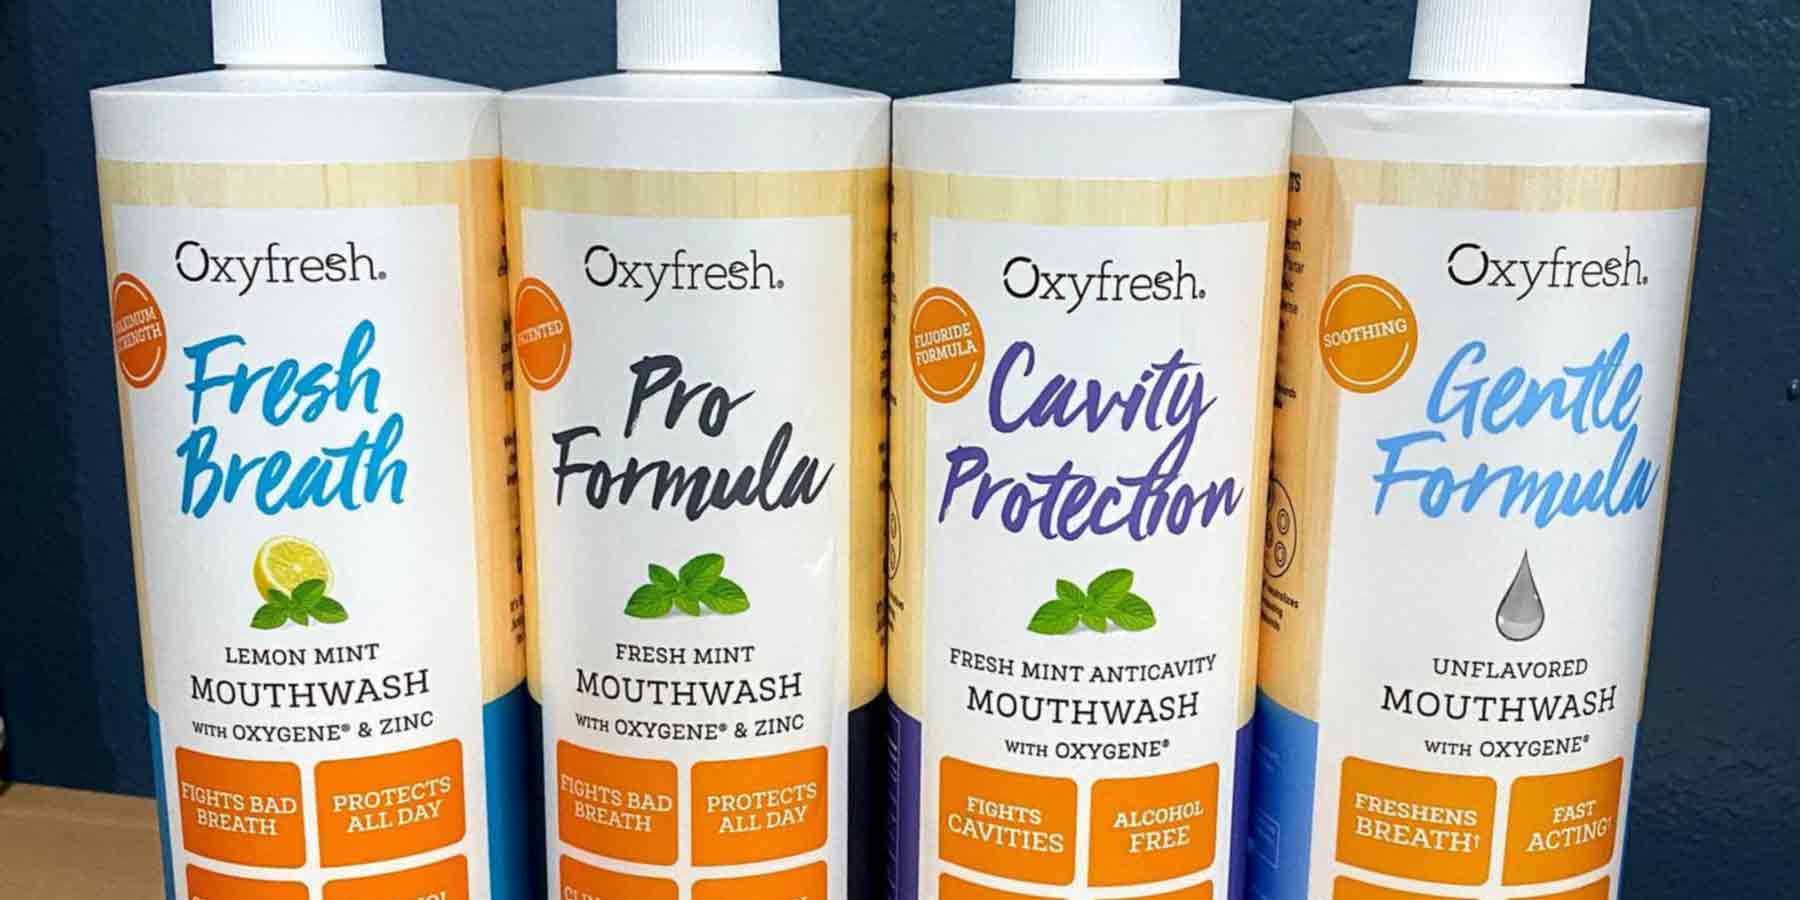 oxyfresh-mouthwash-for-bad-breath-fresh-breath-pro-fresh-with-zinc-fluoride-fights-cavities-gentle-formula-fluoride-free-unflavored